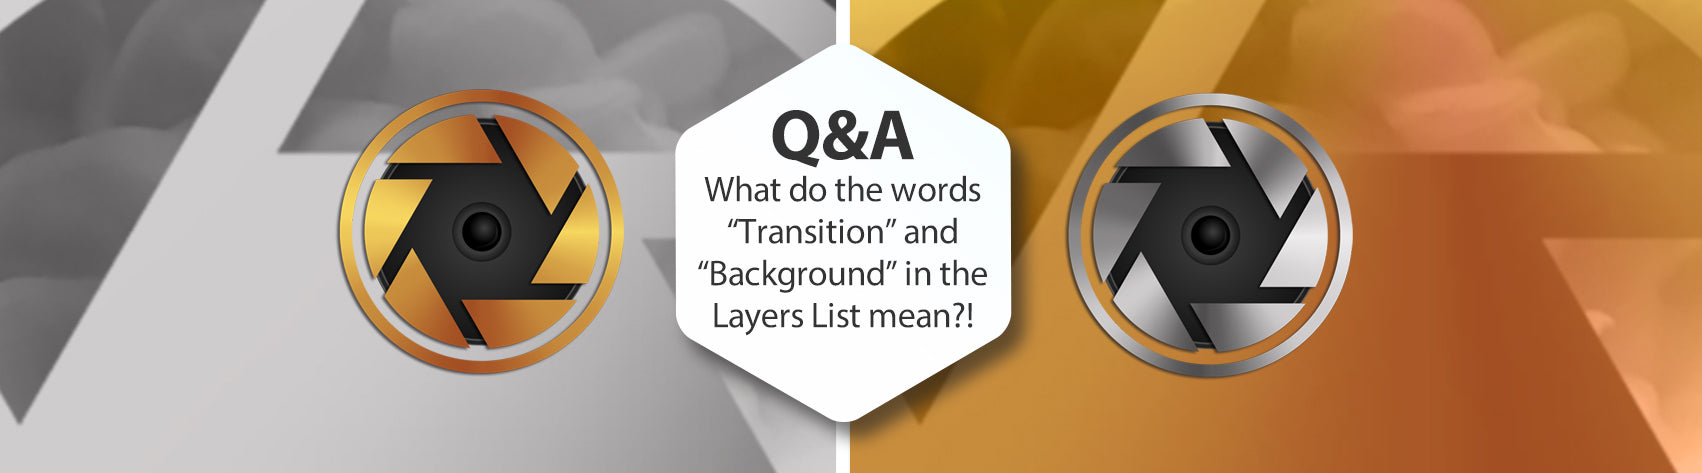 Q&A - What do the words "Transition" and "Background" in the Layers List mean?!